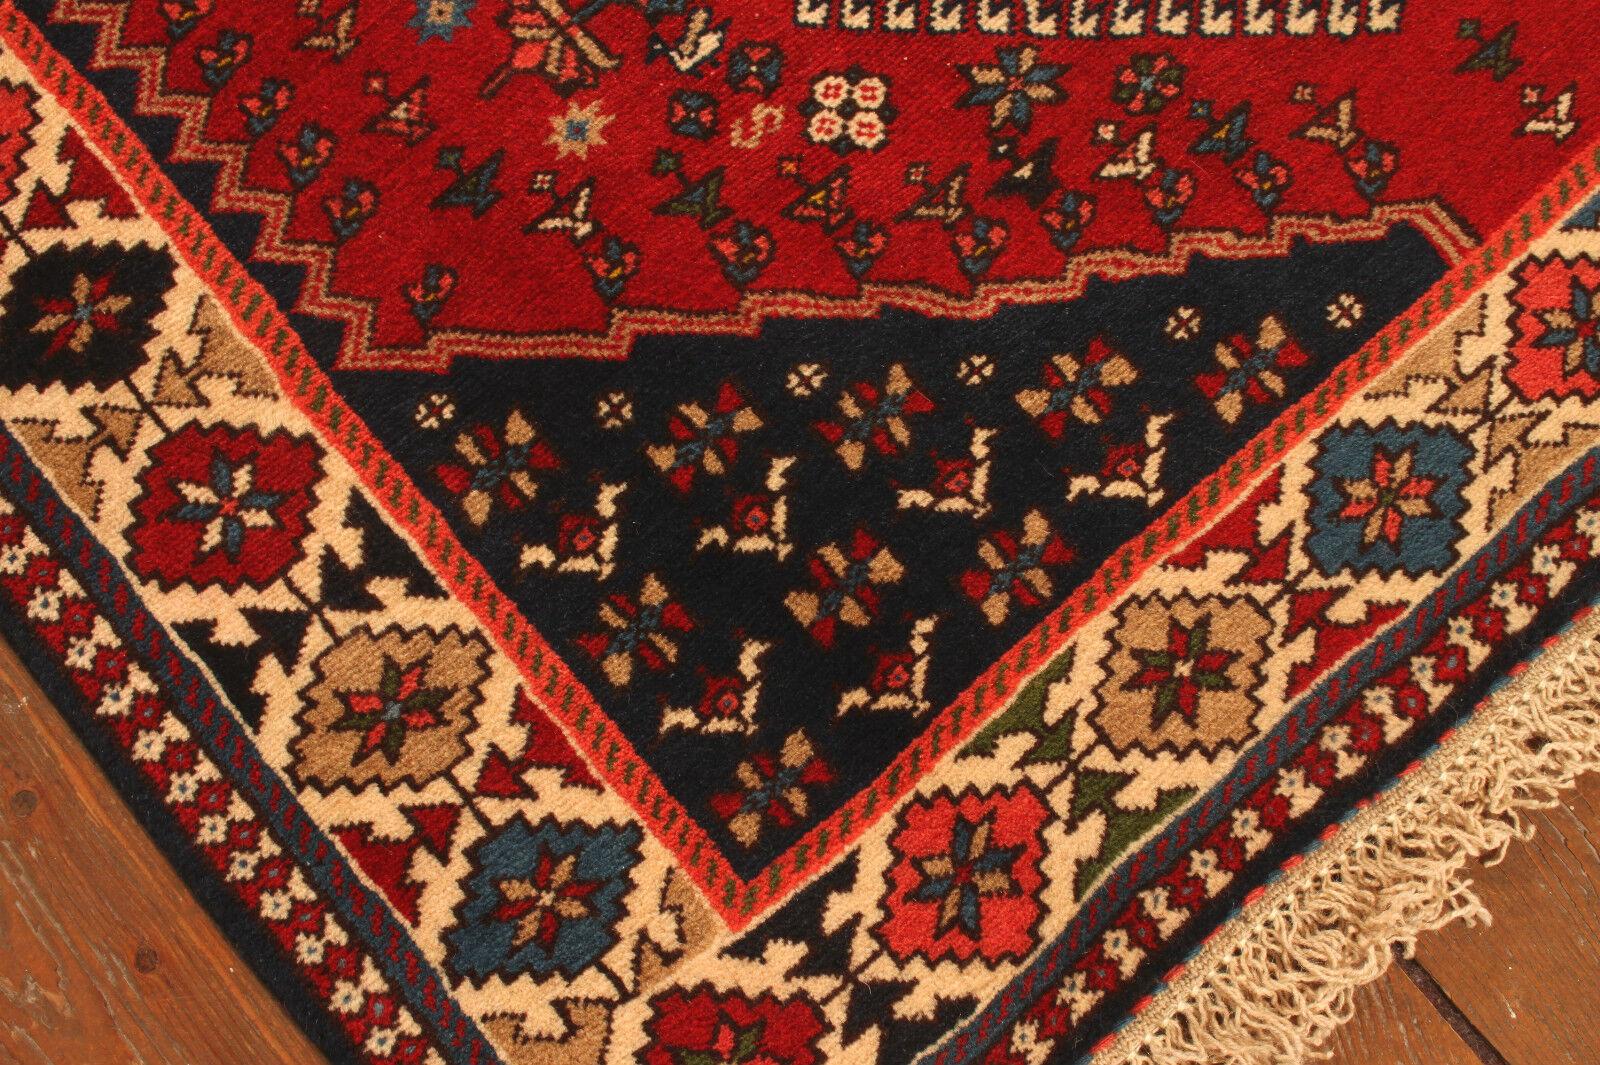 Handmade Vintage Persian Style Yalameh Rug 3.4' x 5.2', 1990s - 1T22 In Good Condition For Sale In Bordeaux, FR